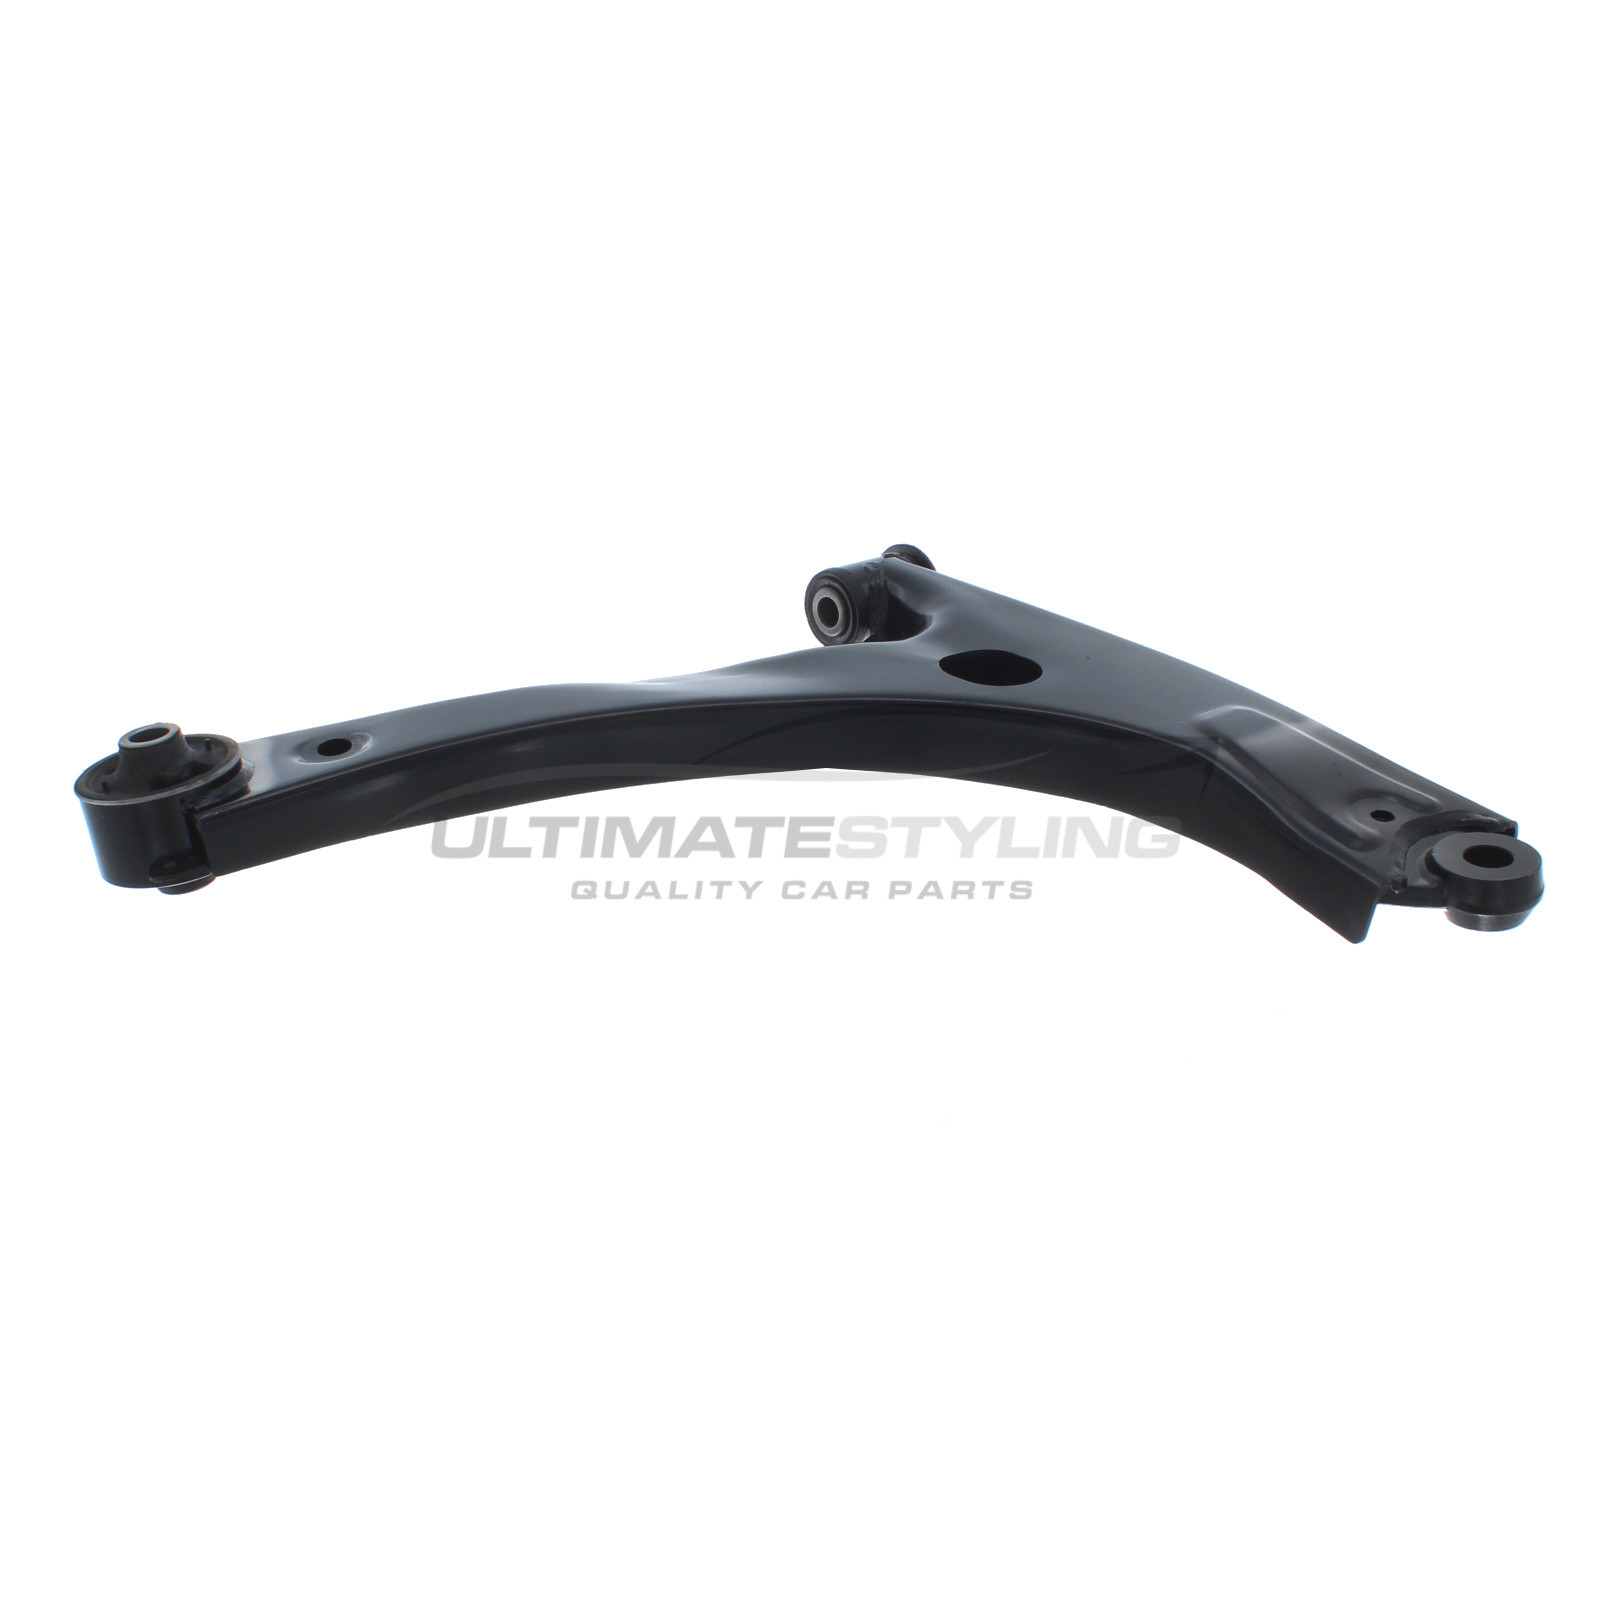 Ford Tourneo Custom 2012-3000, Ford Transit 2014-3000, Ford Transit Custom 2012-3000 Front Lower Suspension Arm (Steel) Excluding Ball Joint and Rear Bush (Standard Duty) Driver Side (RH)